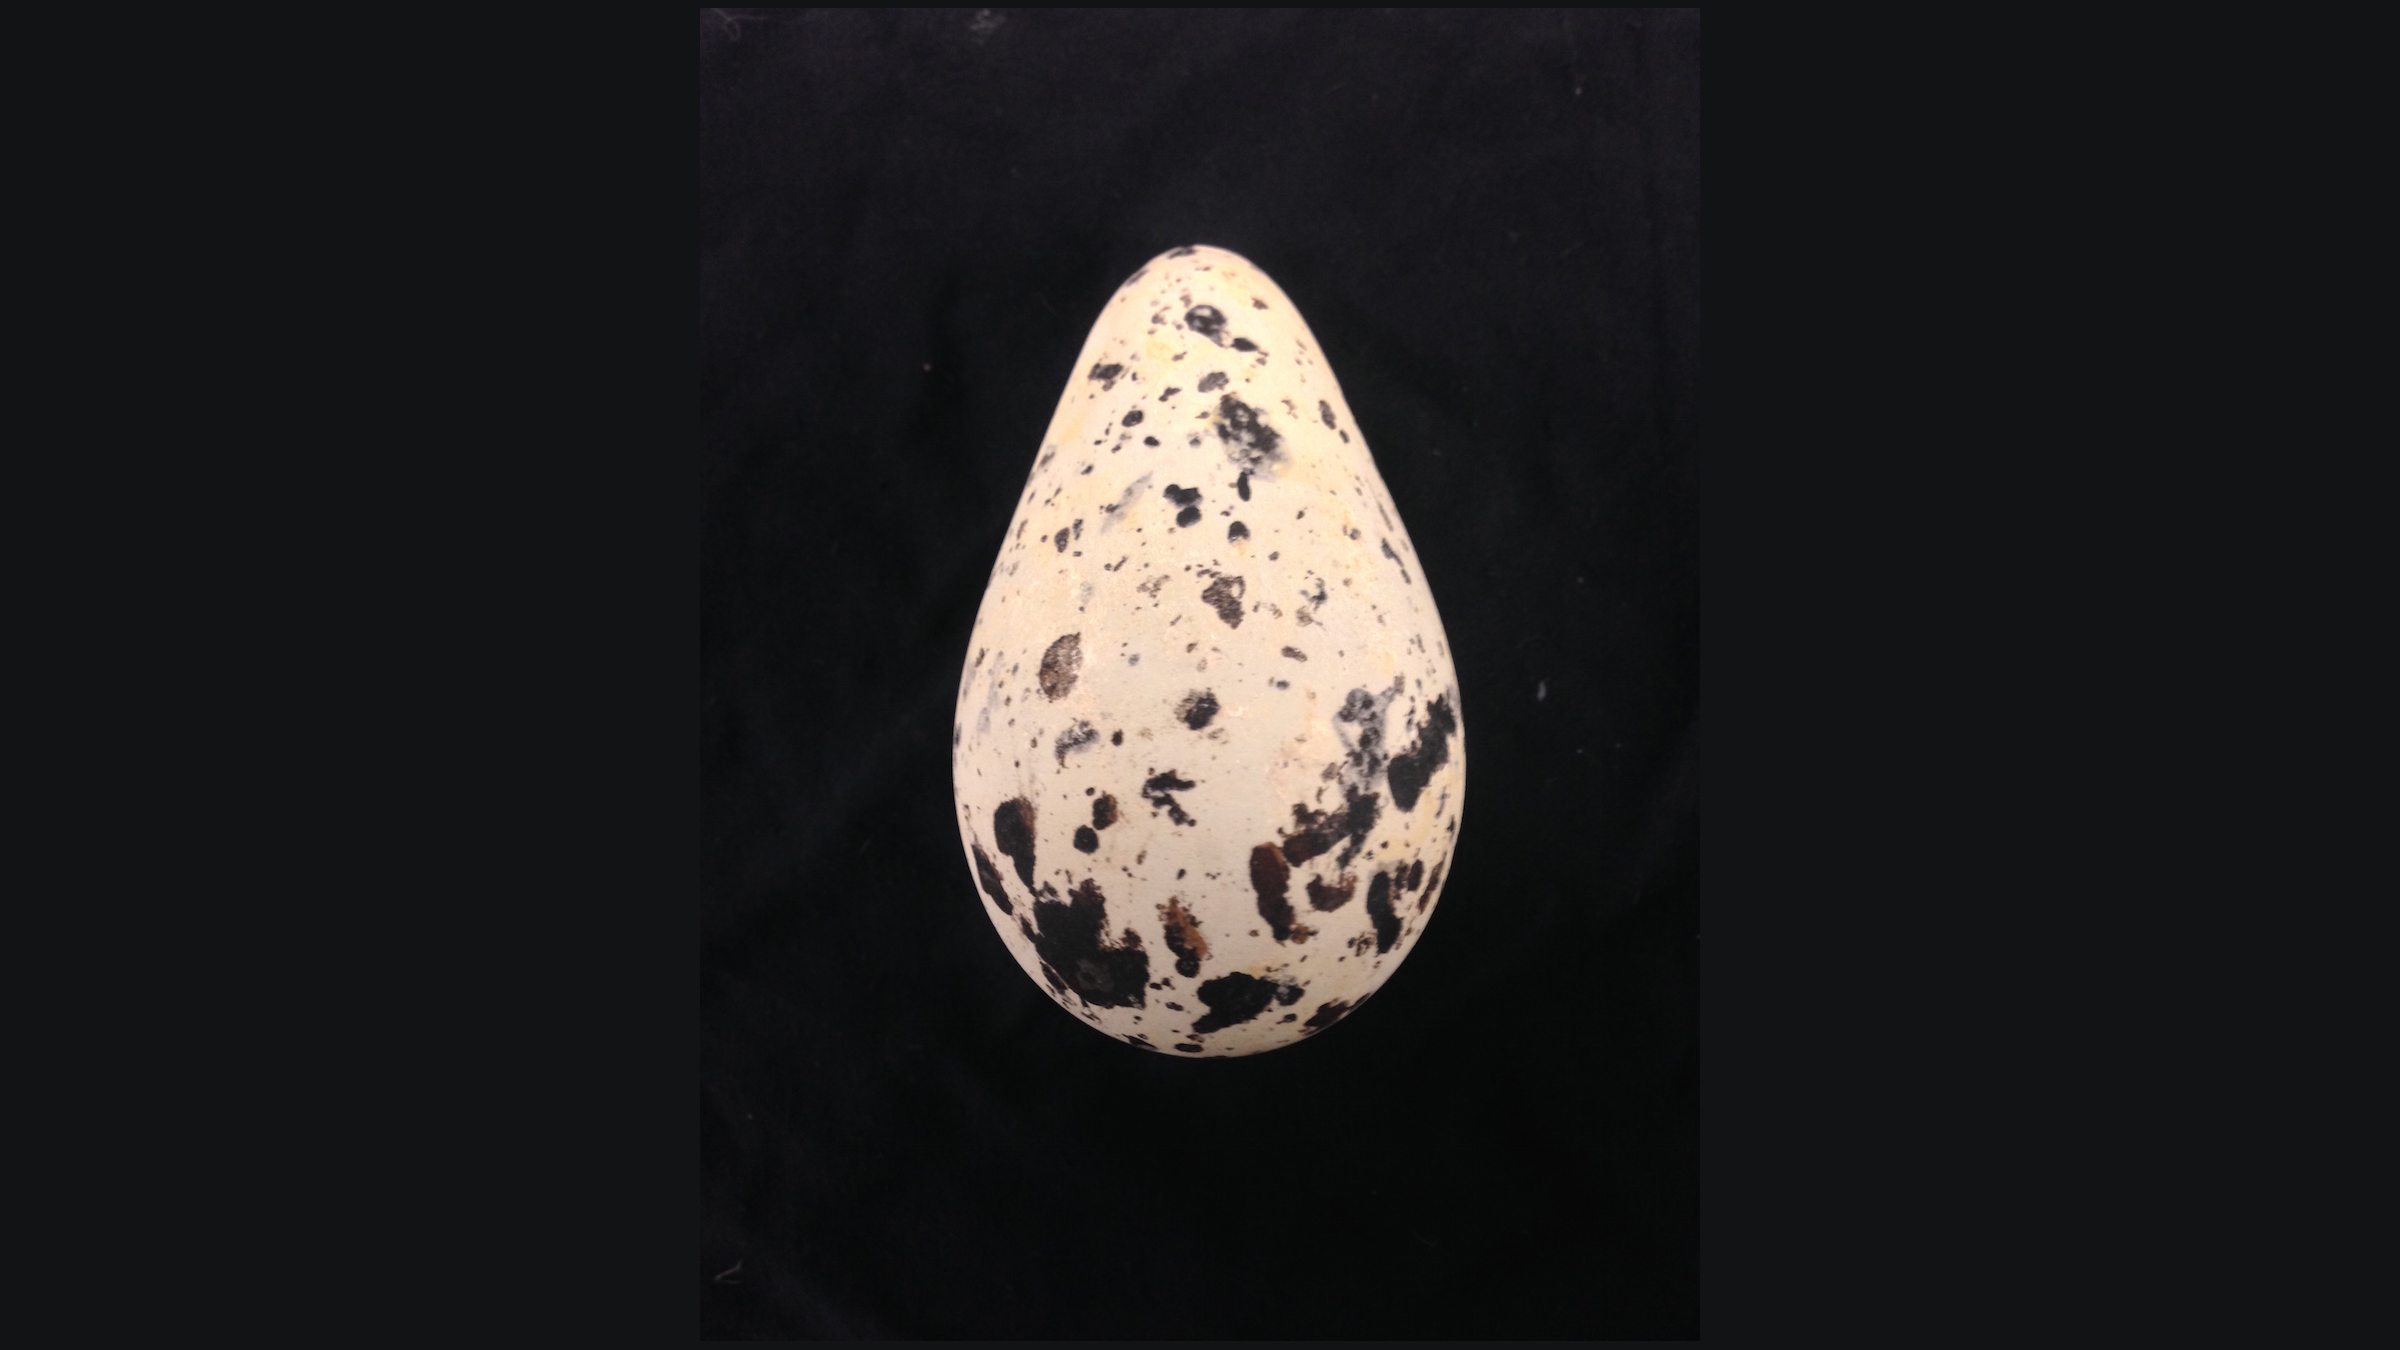 Here we see a white egg with black speckles against a black background. It is pear-shaped.